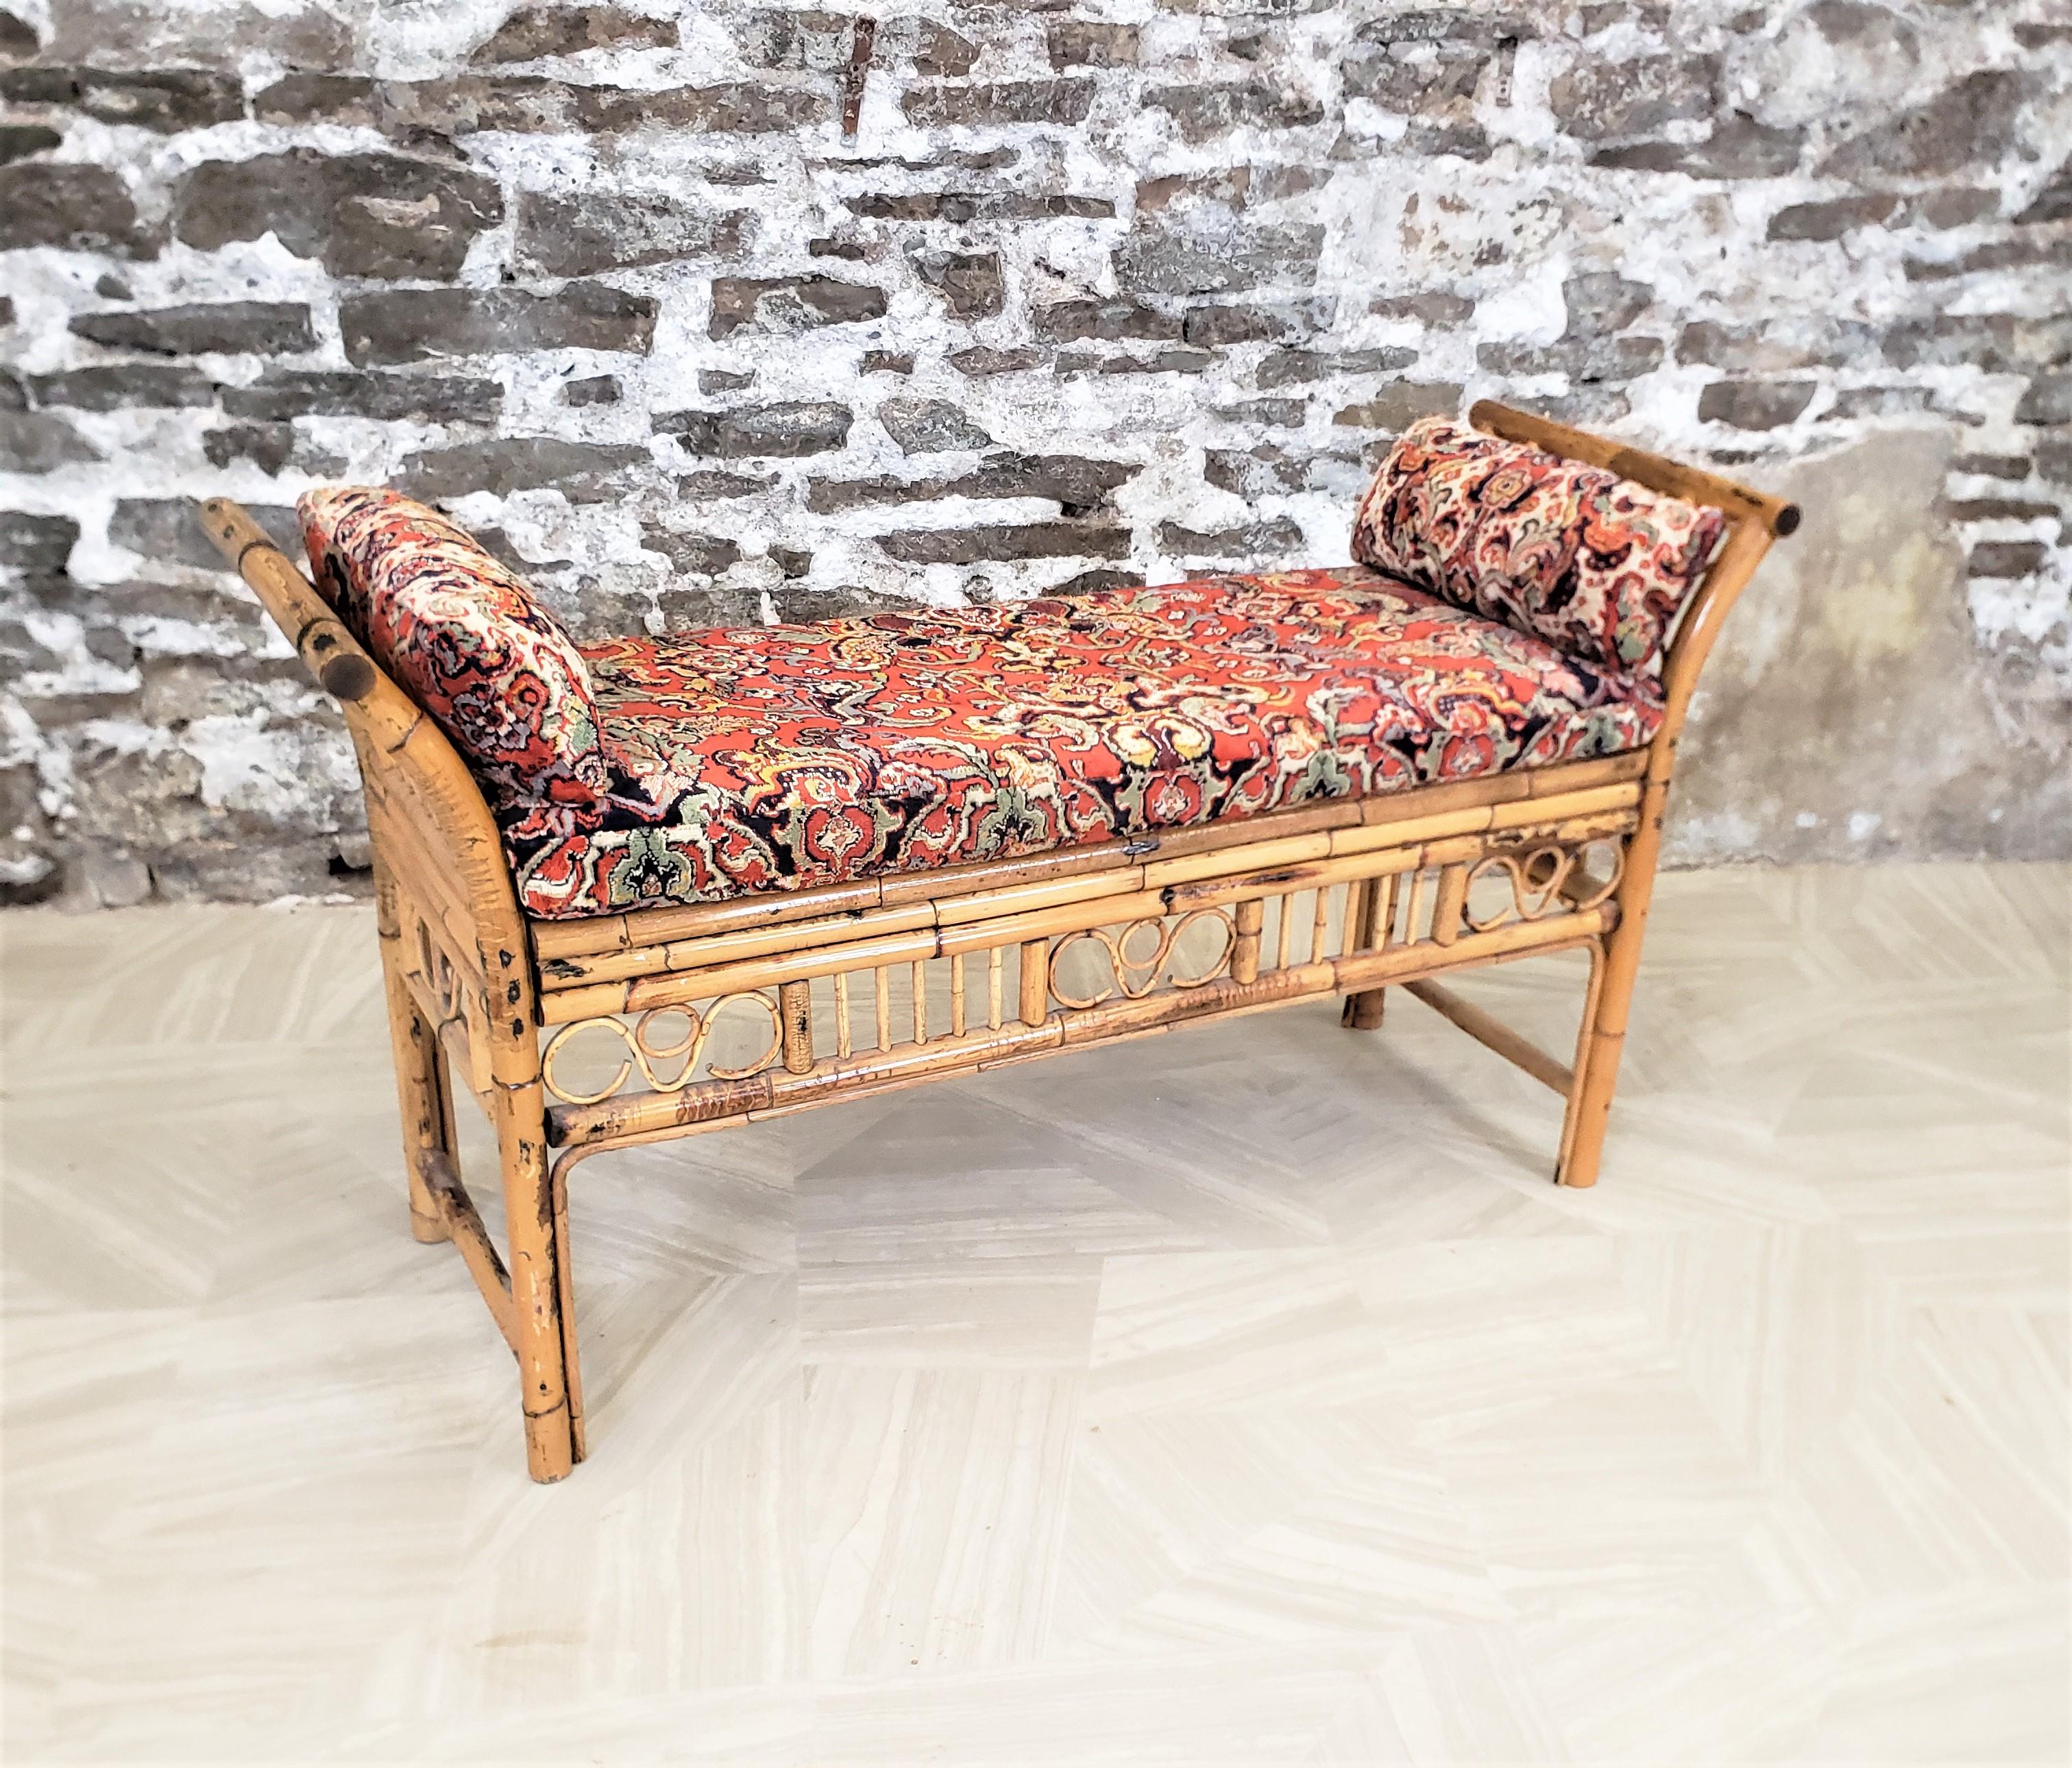 This antique bench is unsigned, but presumed to have originated from Italy and date to approximately 1920 and done in the period Boho style. The bench is composed of rattan with a caned seat. The sides and both front and back are accented with a